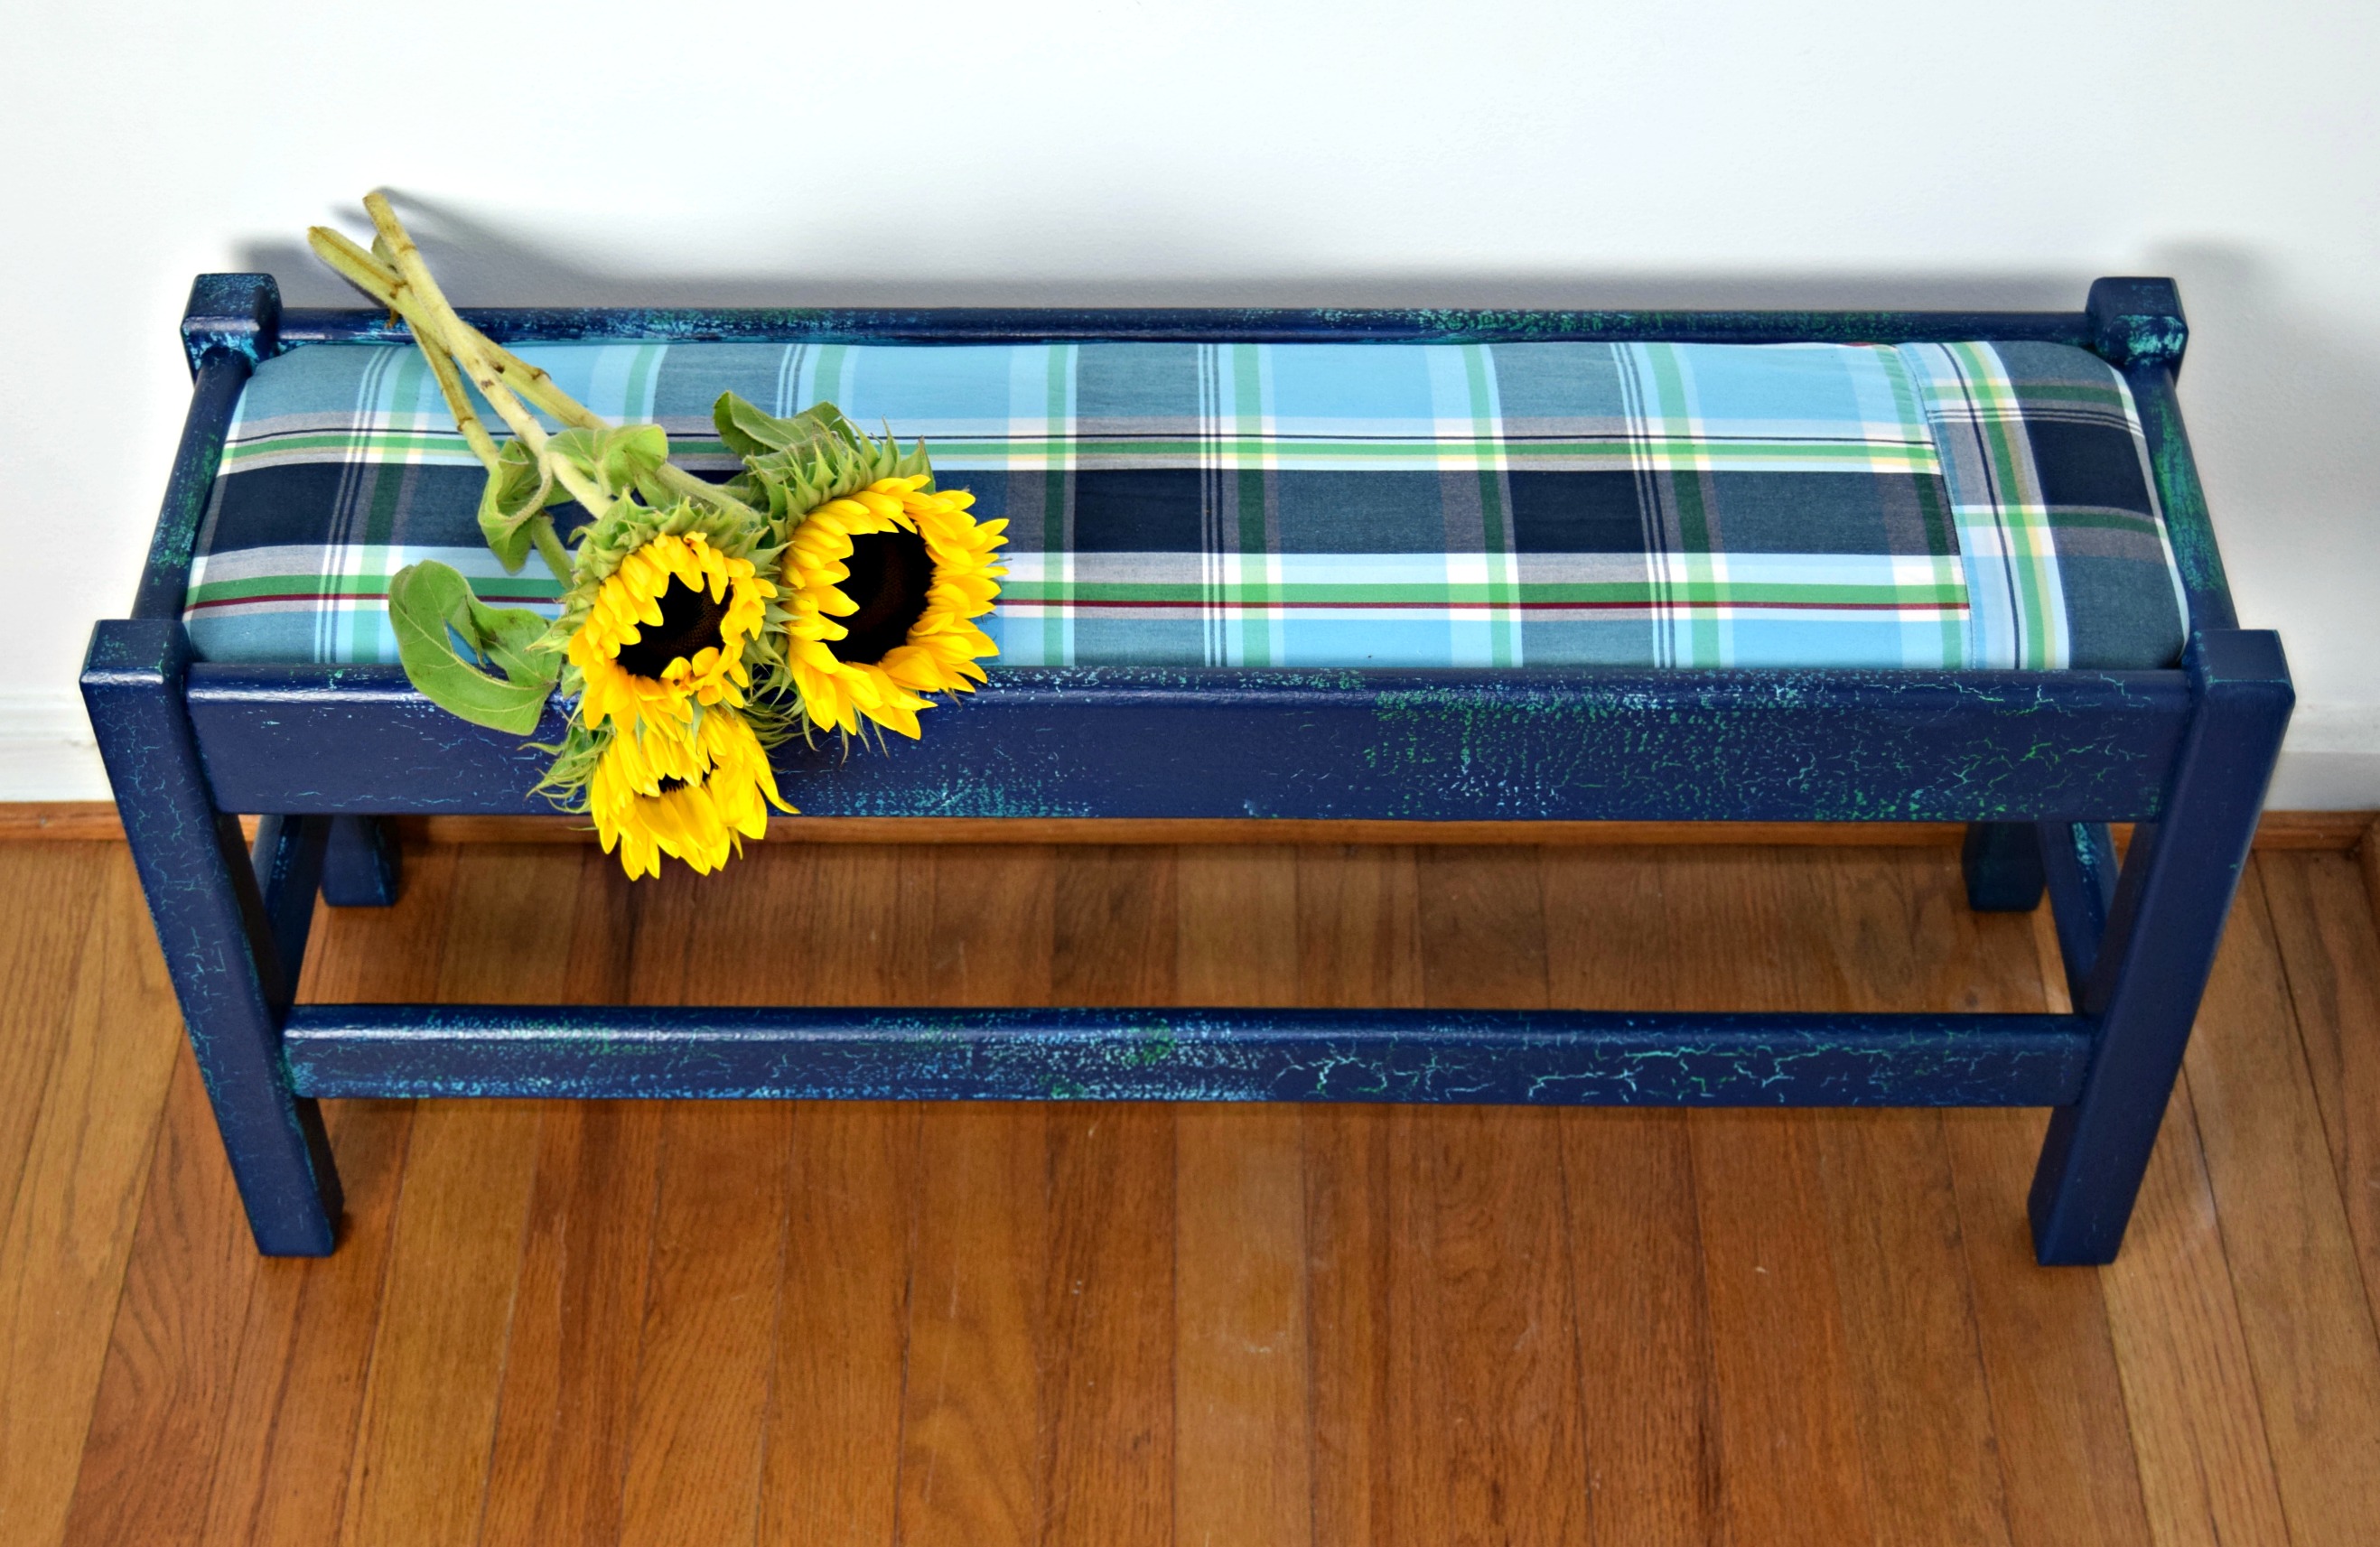 Courtney's completed bench adorned with sunflowers